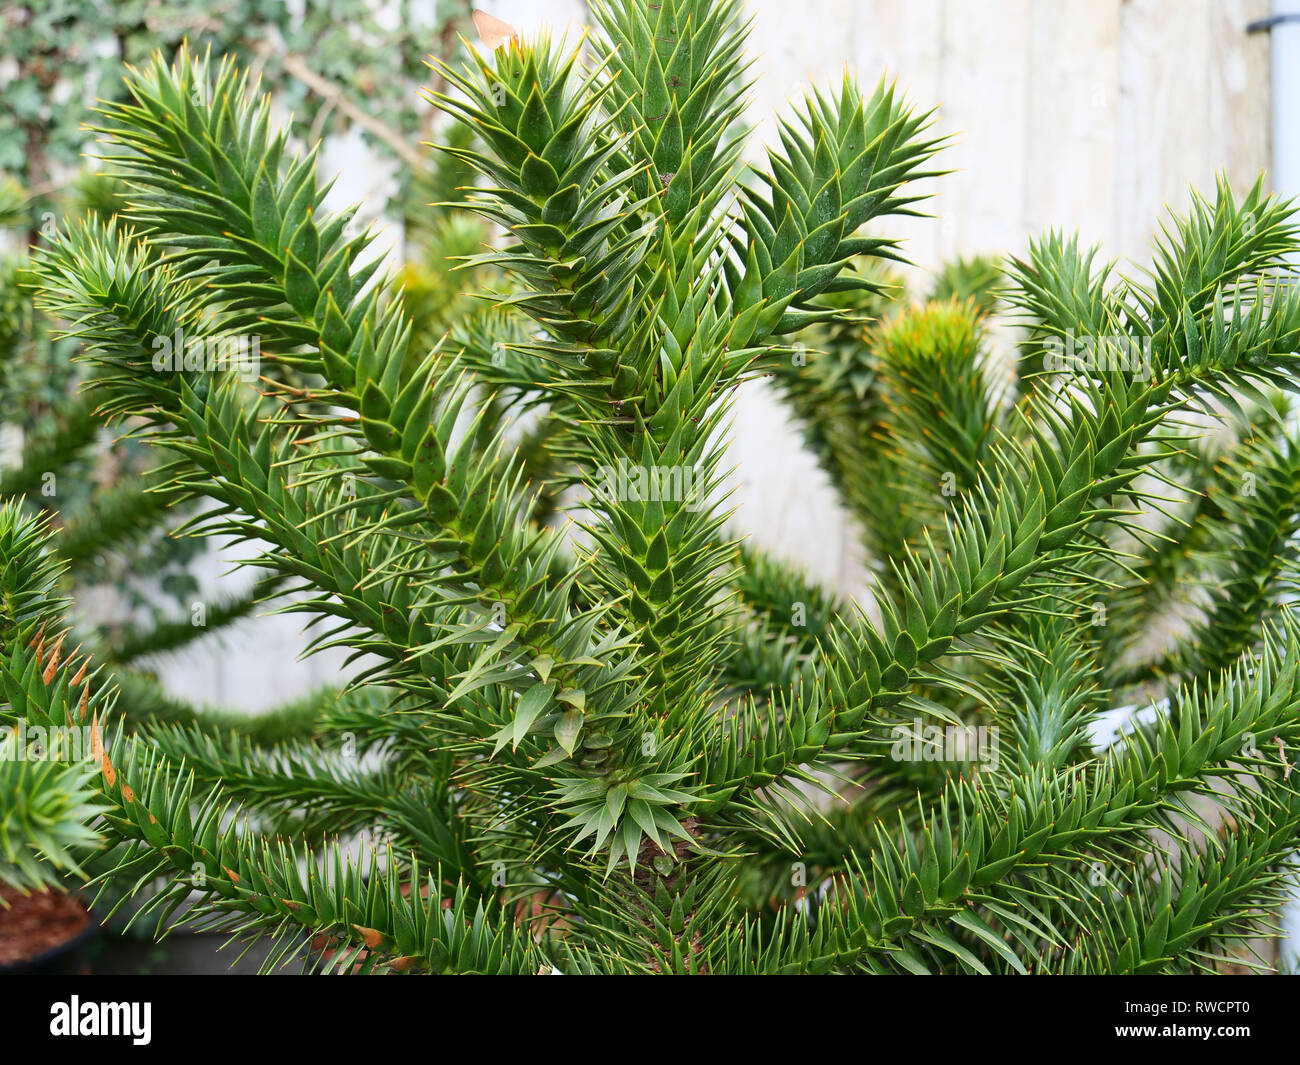 Spine like leaves of the slow and tall growing south American monkey puzzle tree or Araucaria araucana from Chile and Argentina, London, UK. Stock Photo